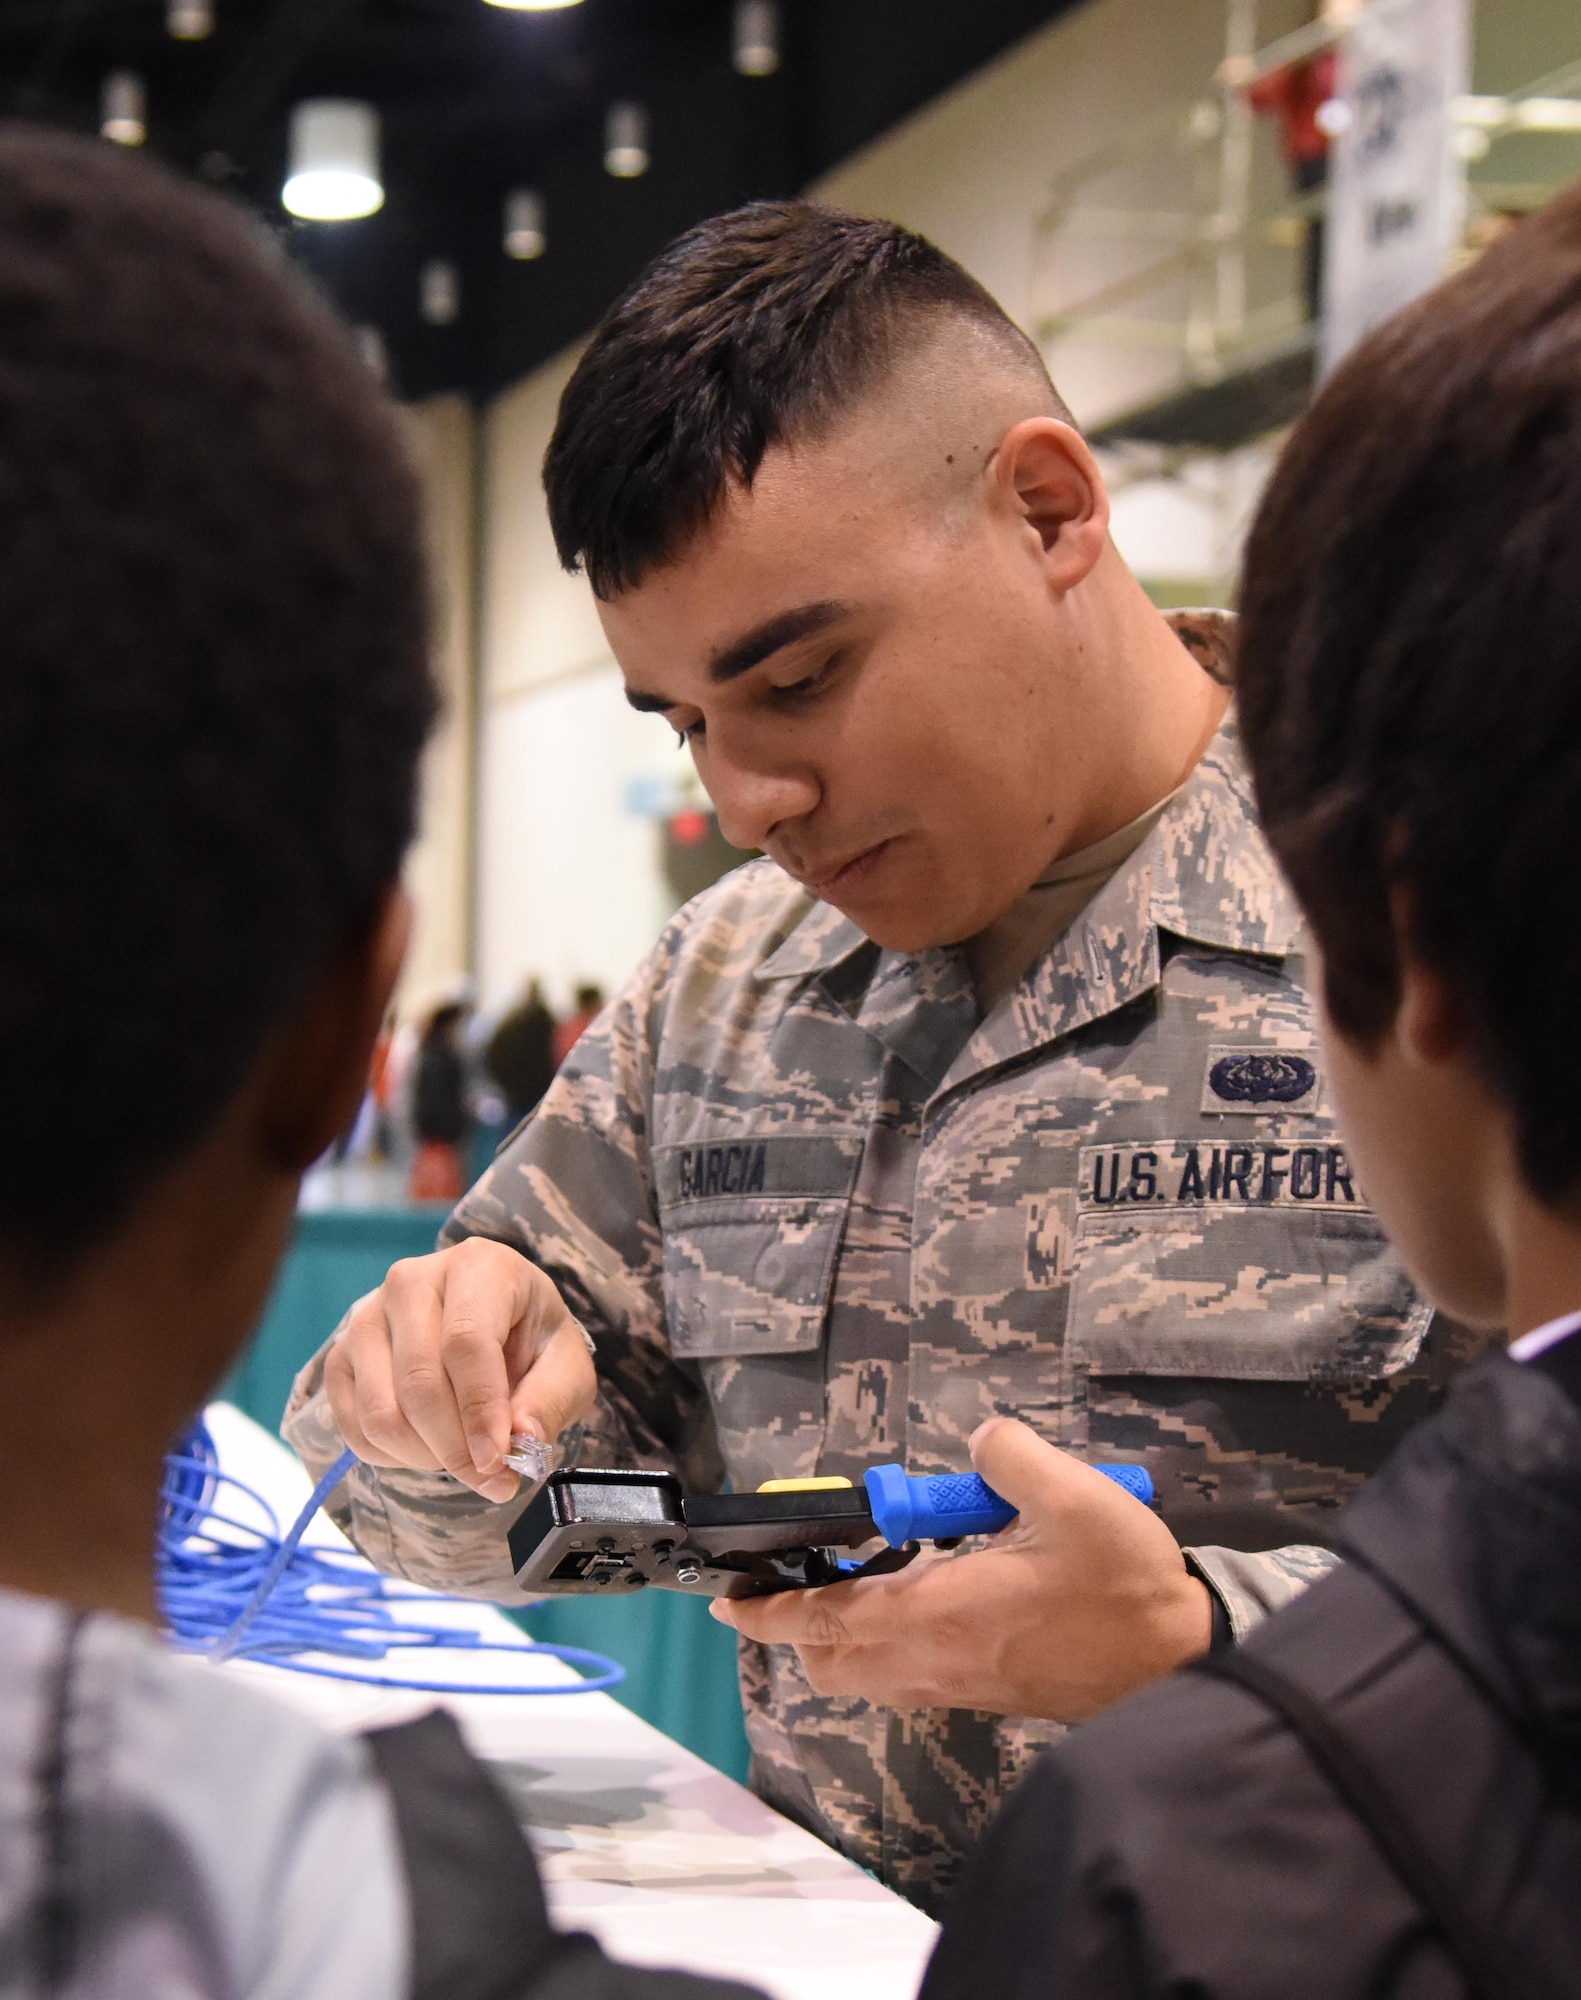 U.S. Air Force Senior Airman Romero Garcia, 81st Communications Squadron client systems technician, provides a demonstration on making cable from scratch to St. Martin Middle School students during the Pathways to Possibilities event at the Mississippi Coast Coliseum in Biloxi, Miss., Nov. 14, 2018. The event is an interactive career expo designed for all eighth graders in private and public schools in the six lower counties of Mississippi. The purpose of the event, set forth by the Mississippi Department of Education, is to help encourage a direction for the students high school pathway choice and is linked to the Common Core state standards. (U.S. Air Force photo by Kemberly Groue)